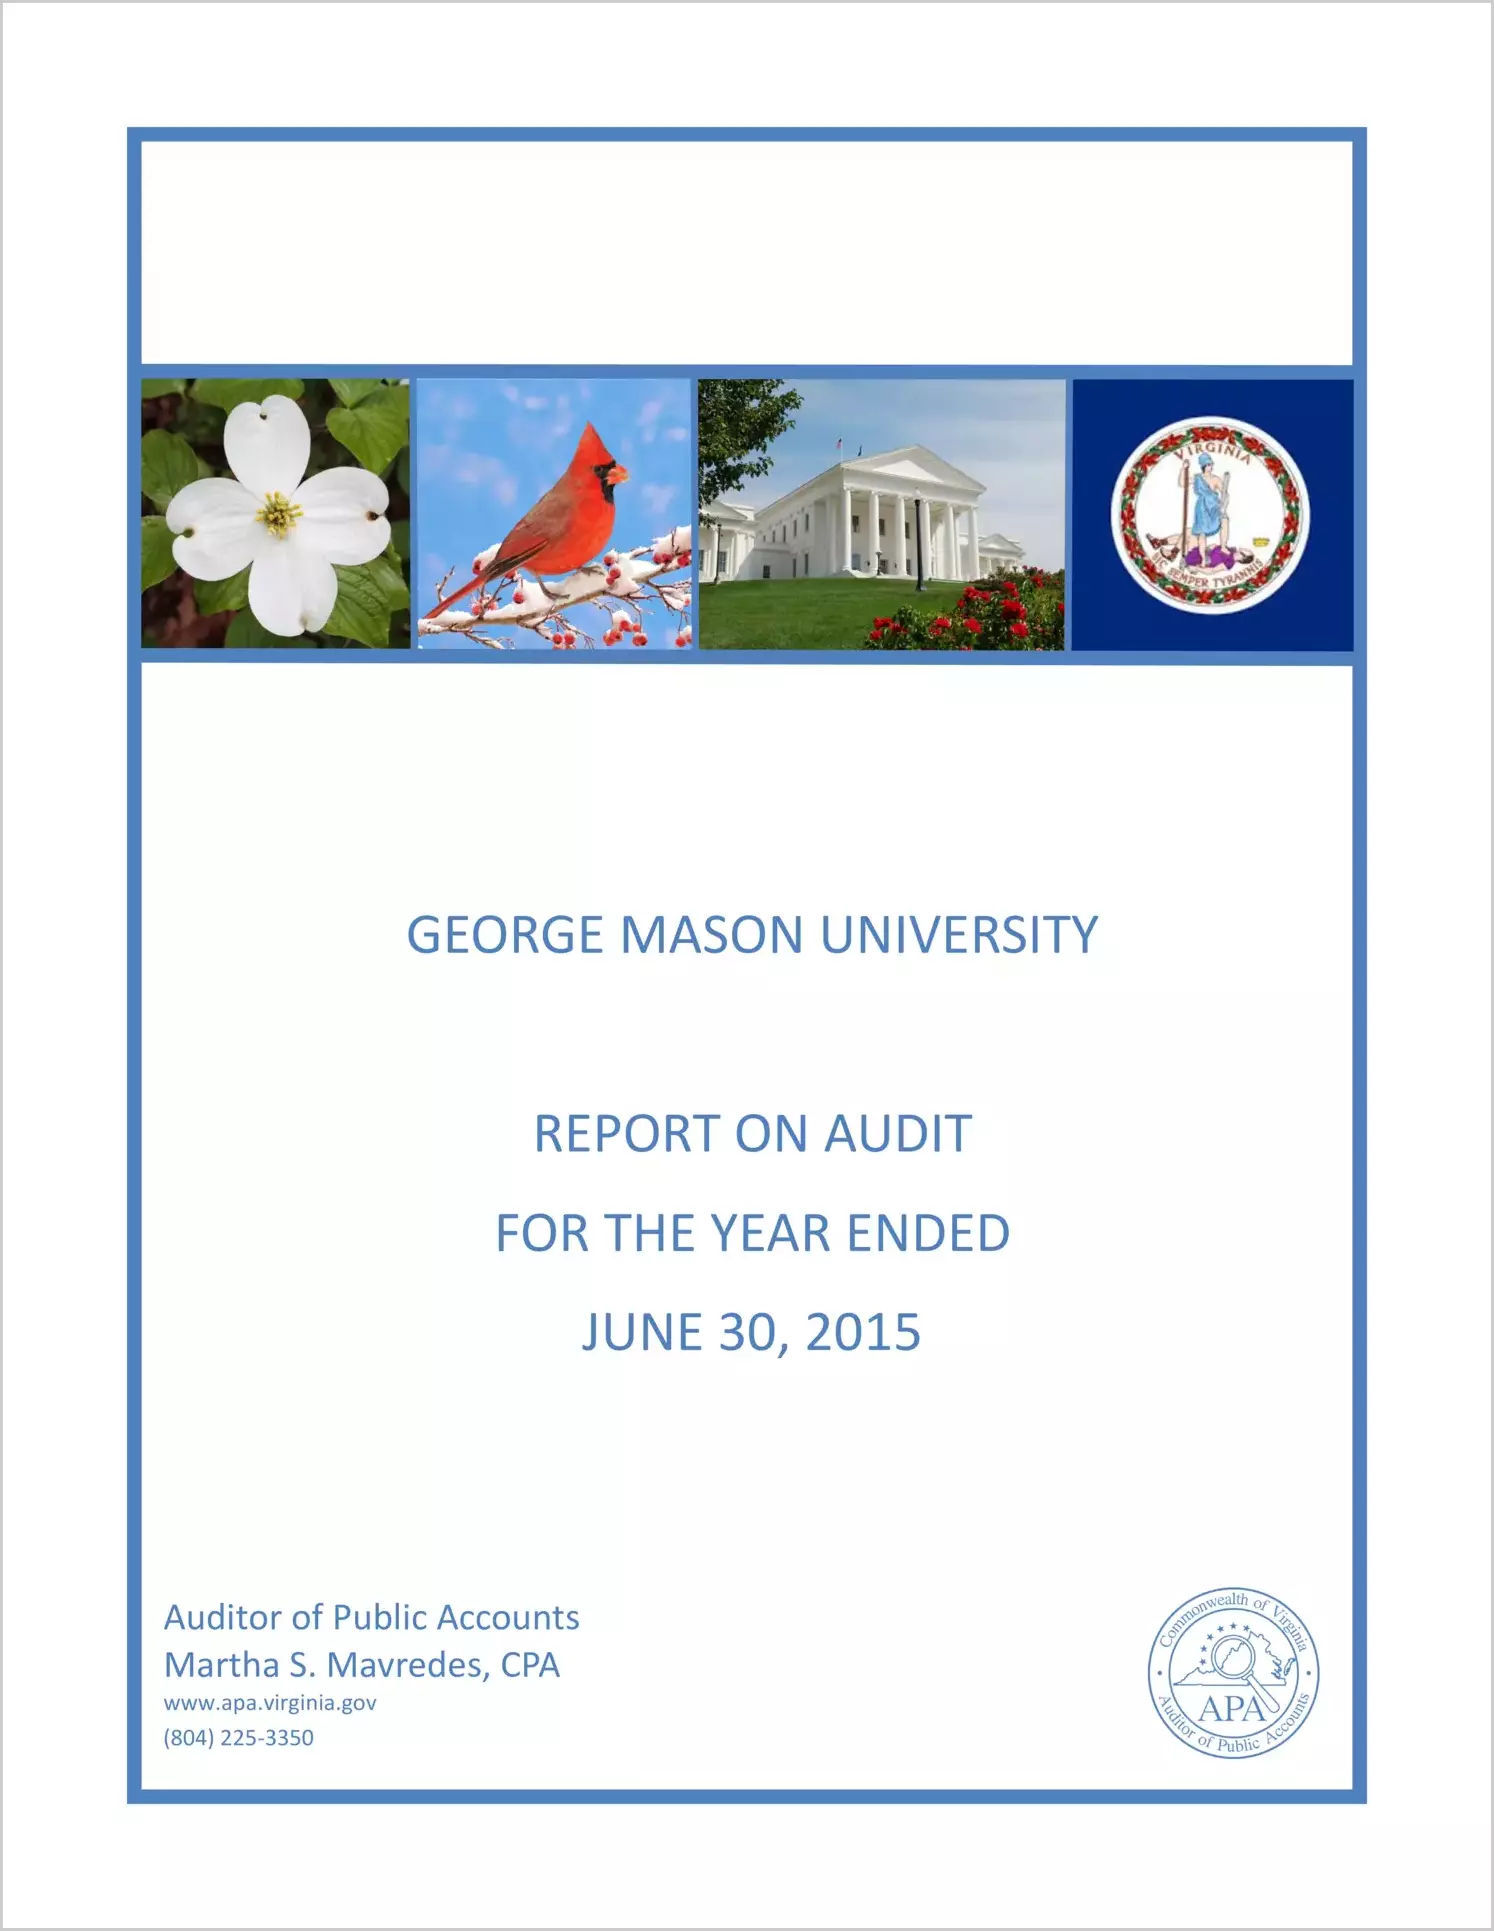 George Mason University - for the year ended June 30, 2015